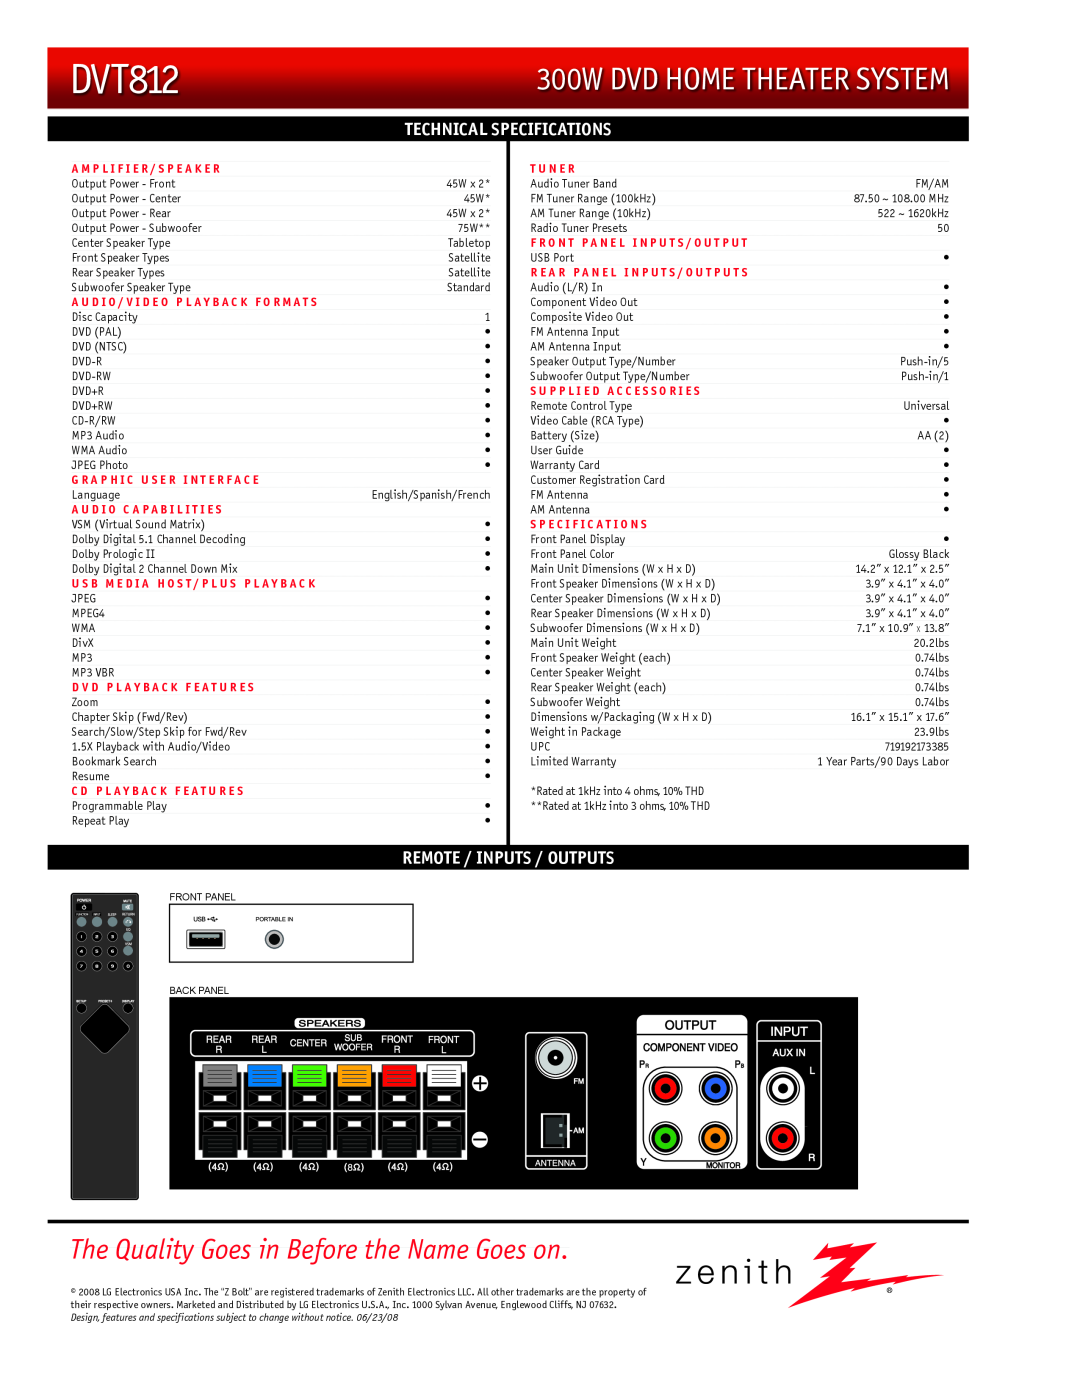 Zenith DVT812 manual Technical, Specifications, Remote / Inputs / Outputs, 300W DVD Home theater system 